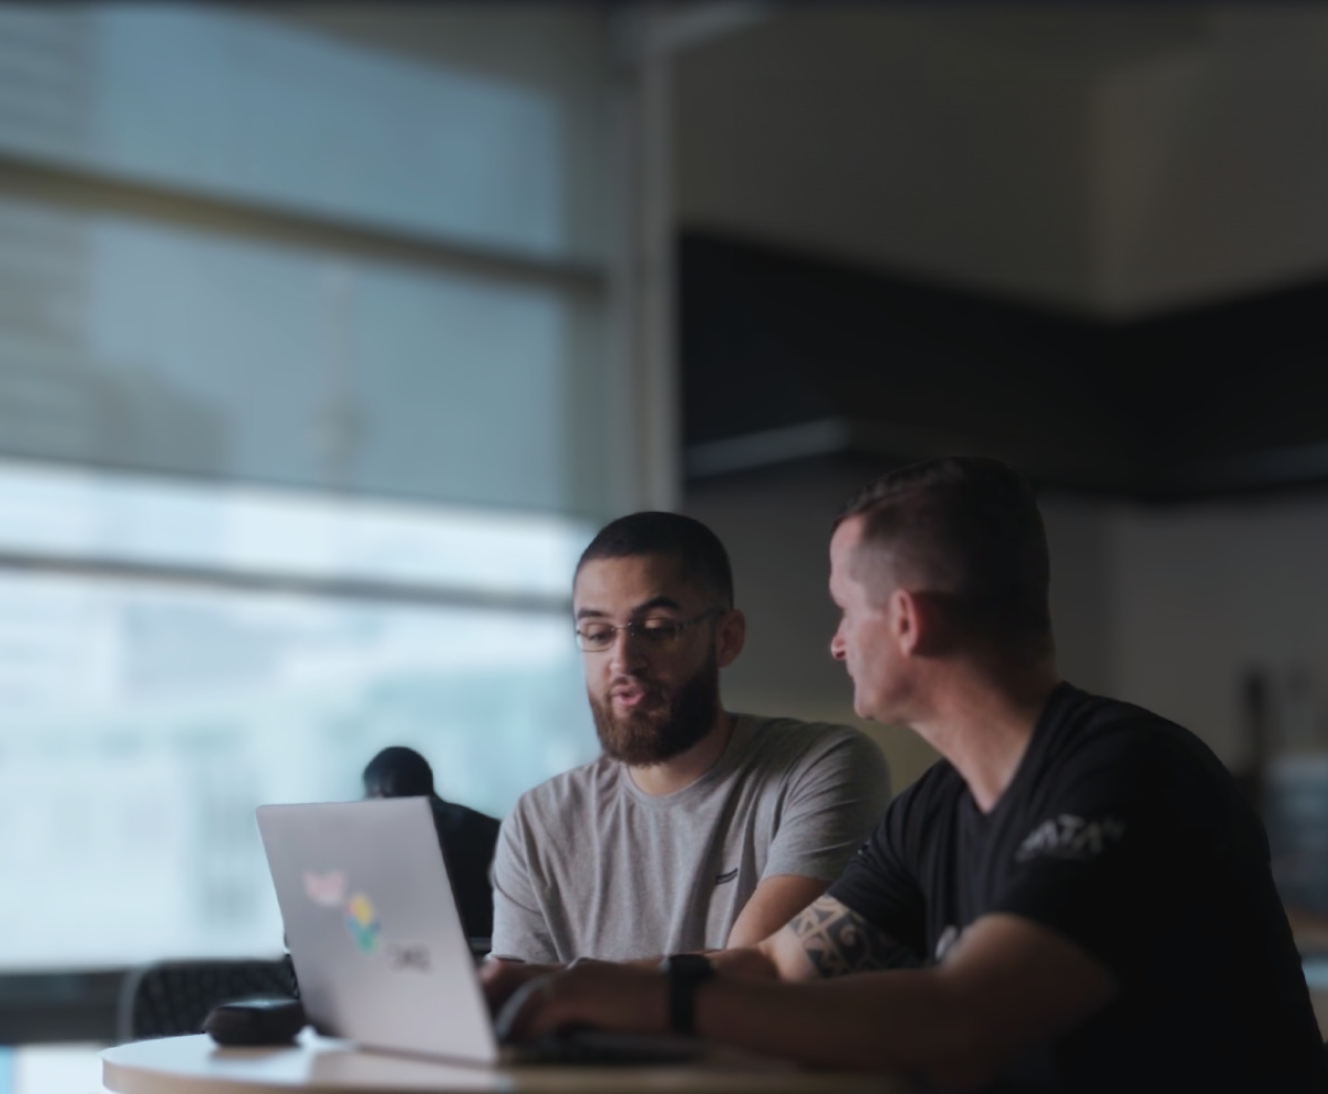 Two men, one with a beard, looking at a laptop screen together in a modern office setting with large windows.